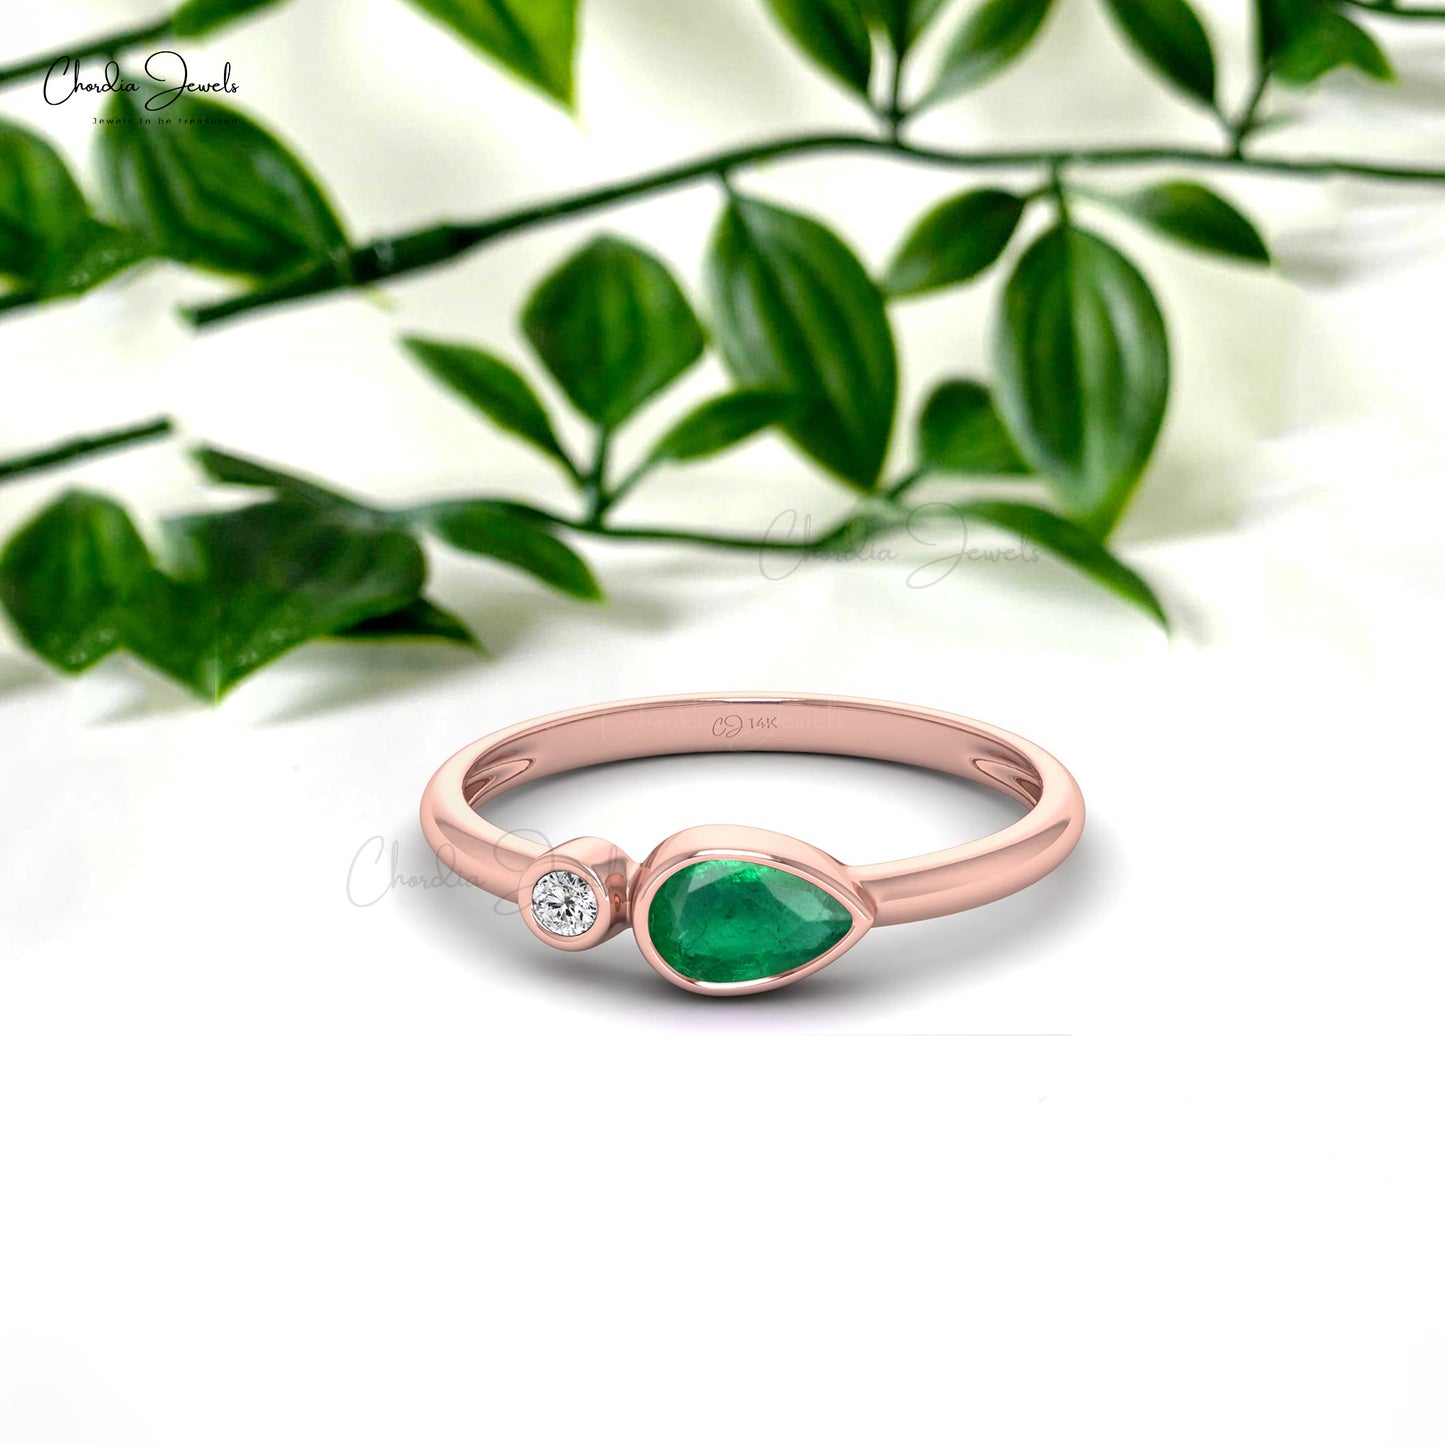 Load image into Gallery viewer, Genuine Emerald 6X4mm Pear Cut Gemstone Ring 14k Solid Gold White Diamond Dainty Ring For Her
